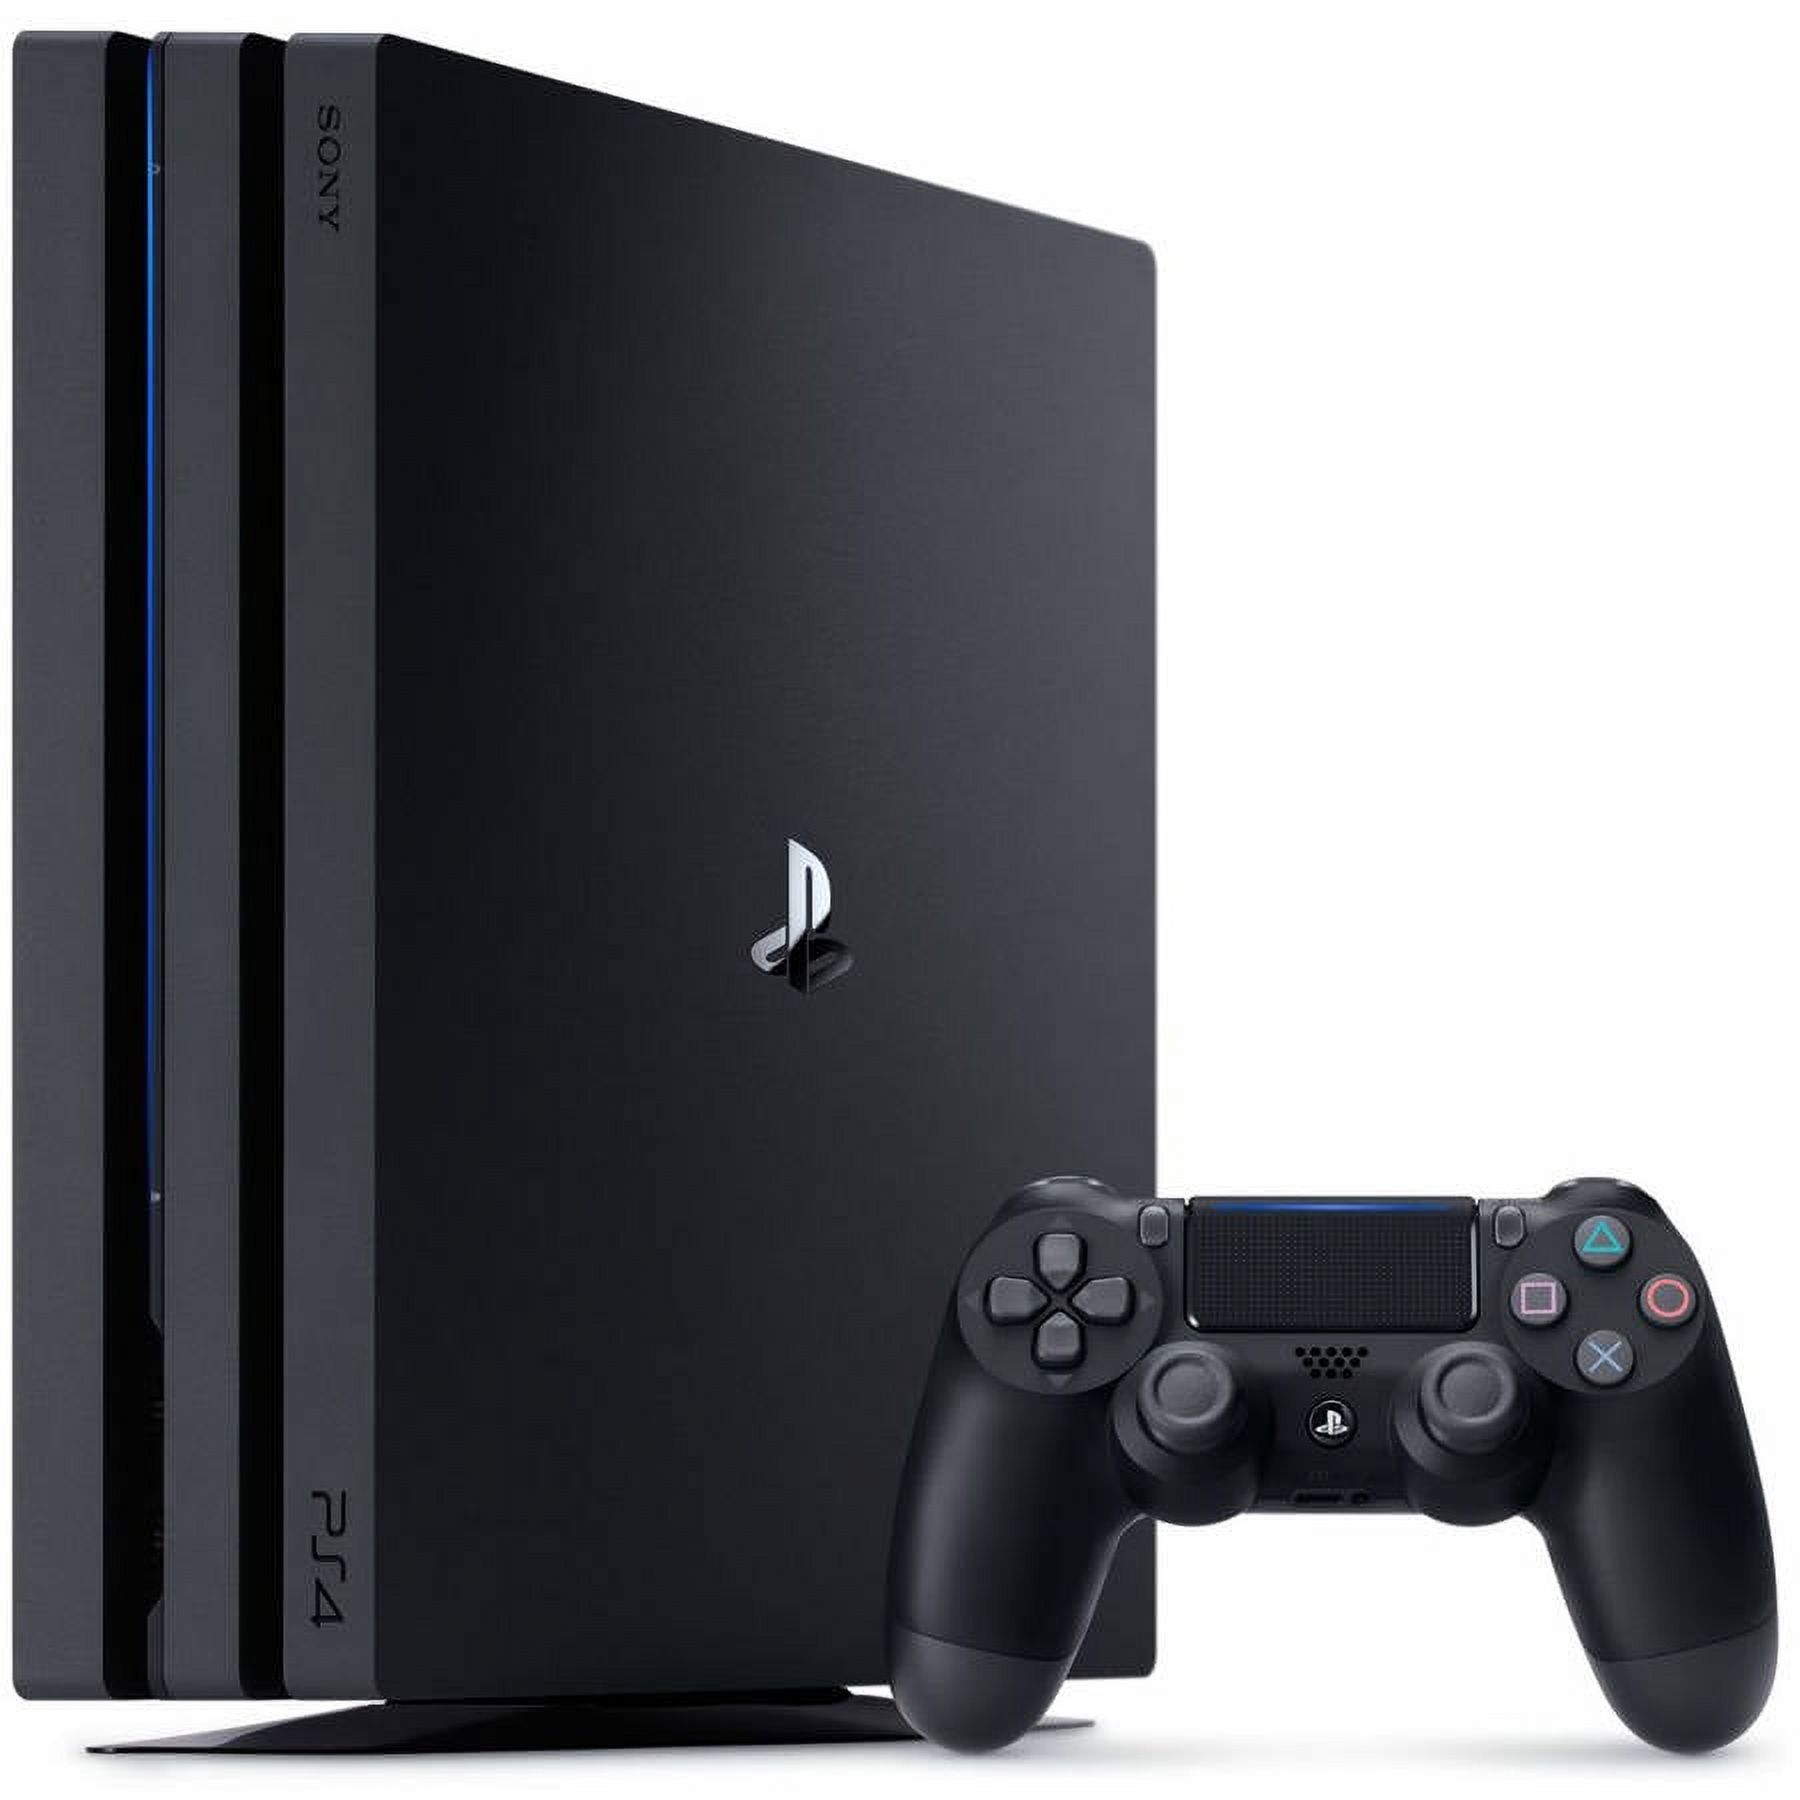 Restored Sony PlayStation 4 Pro 1TB Console, Black, RB3001510 (Refurbished) - image 1 of 5